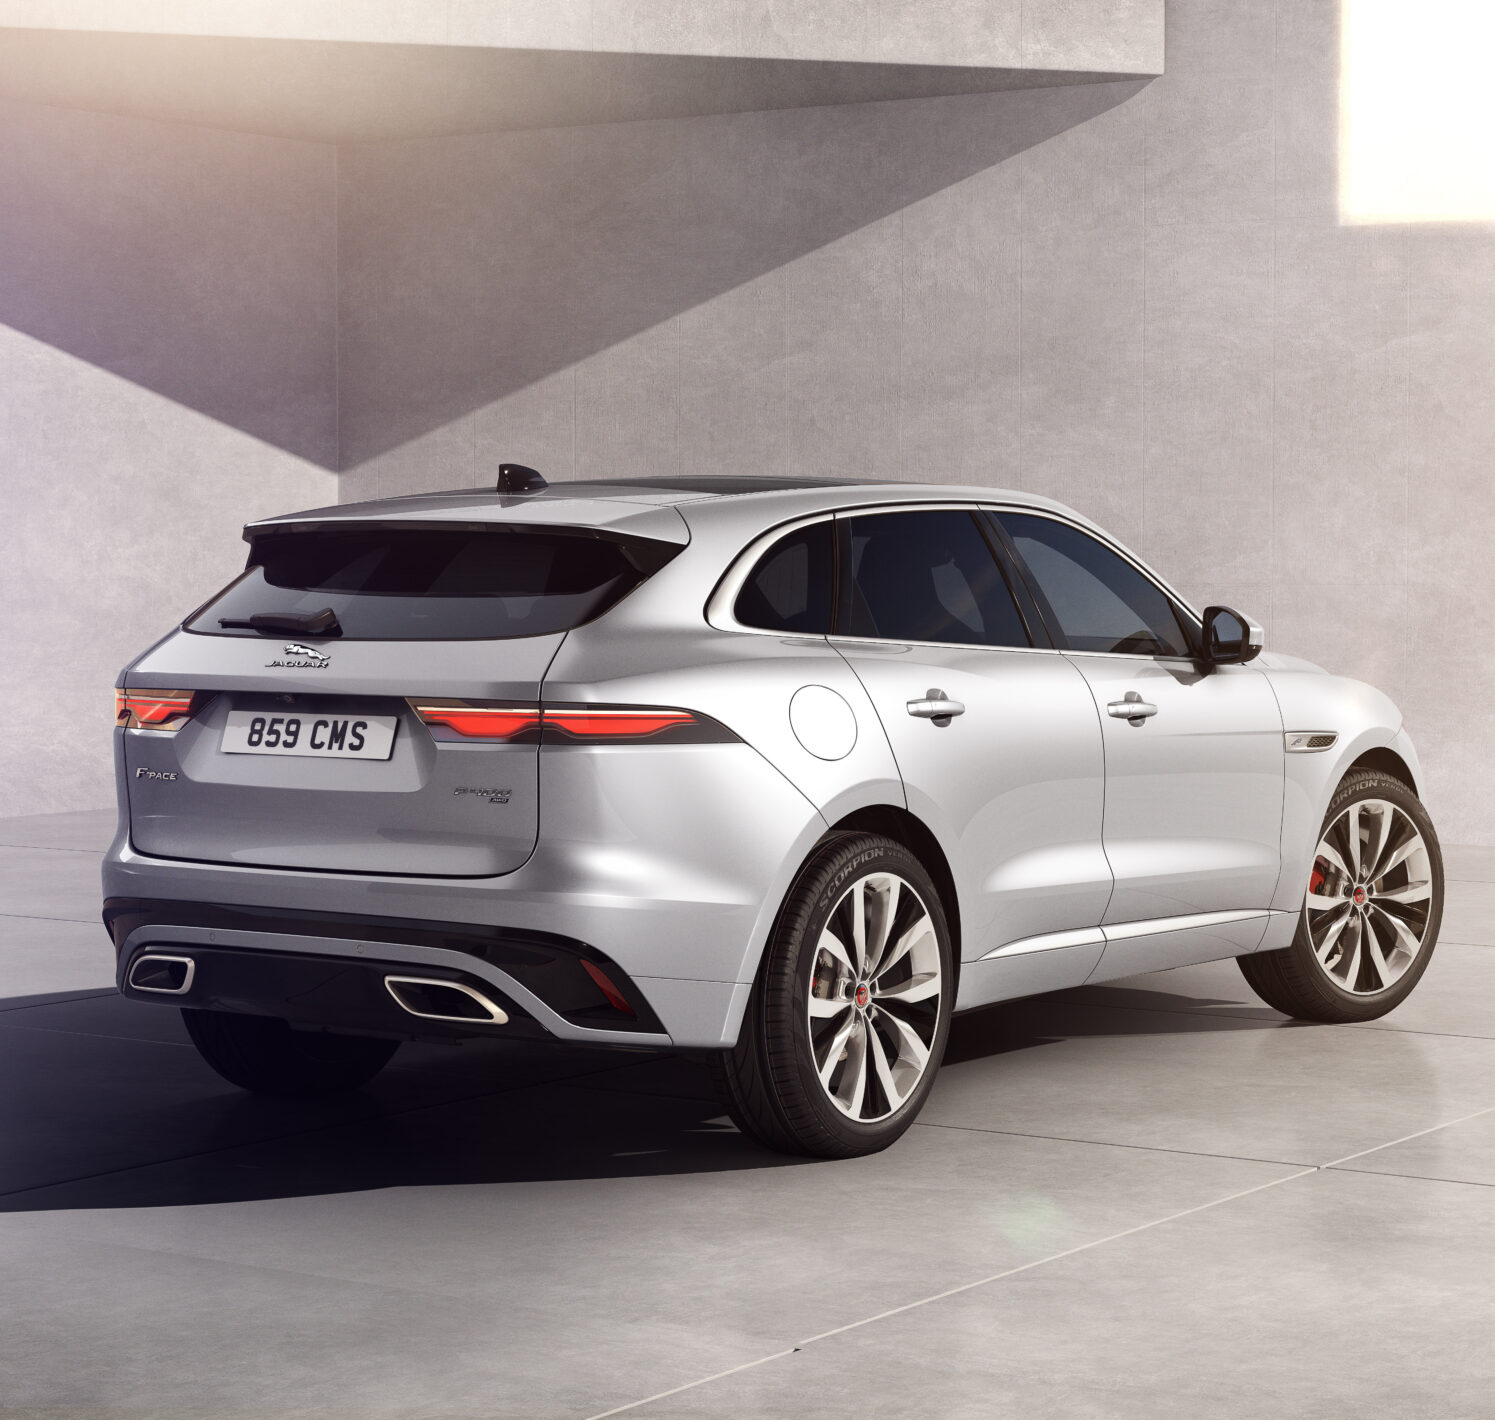 https://autofilter.sk/assets/images/f-pace/gallery/Jag_F-PACE_22MY_03_R-Dynamic_Exterior_Rear_3-4_110821.jpg - obrazok